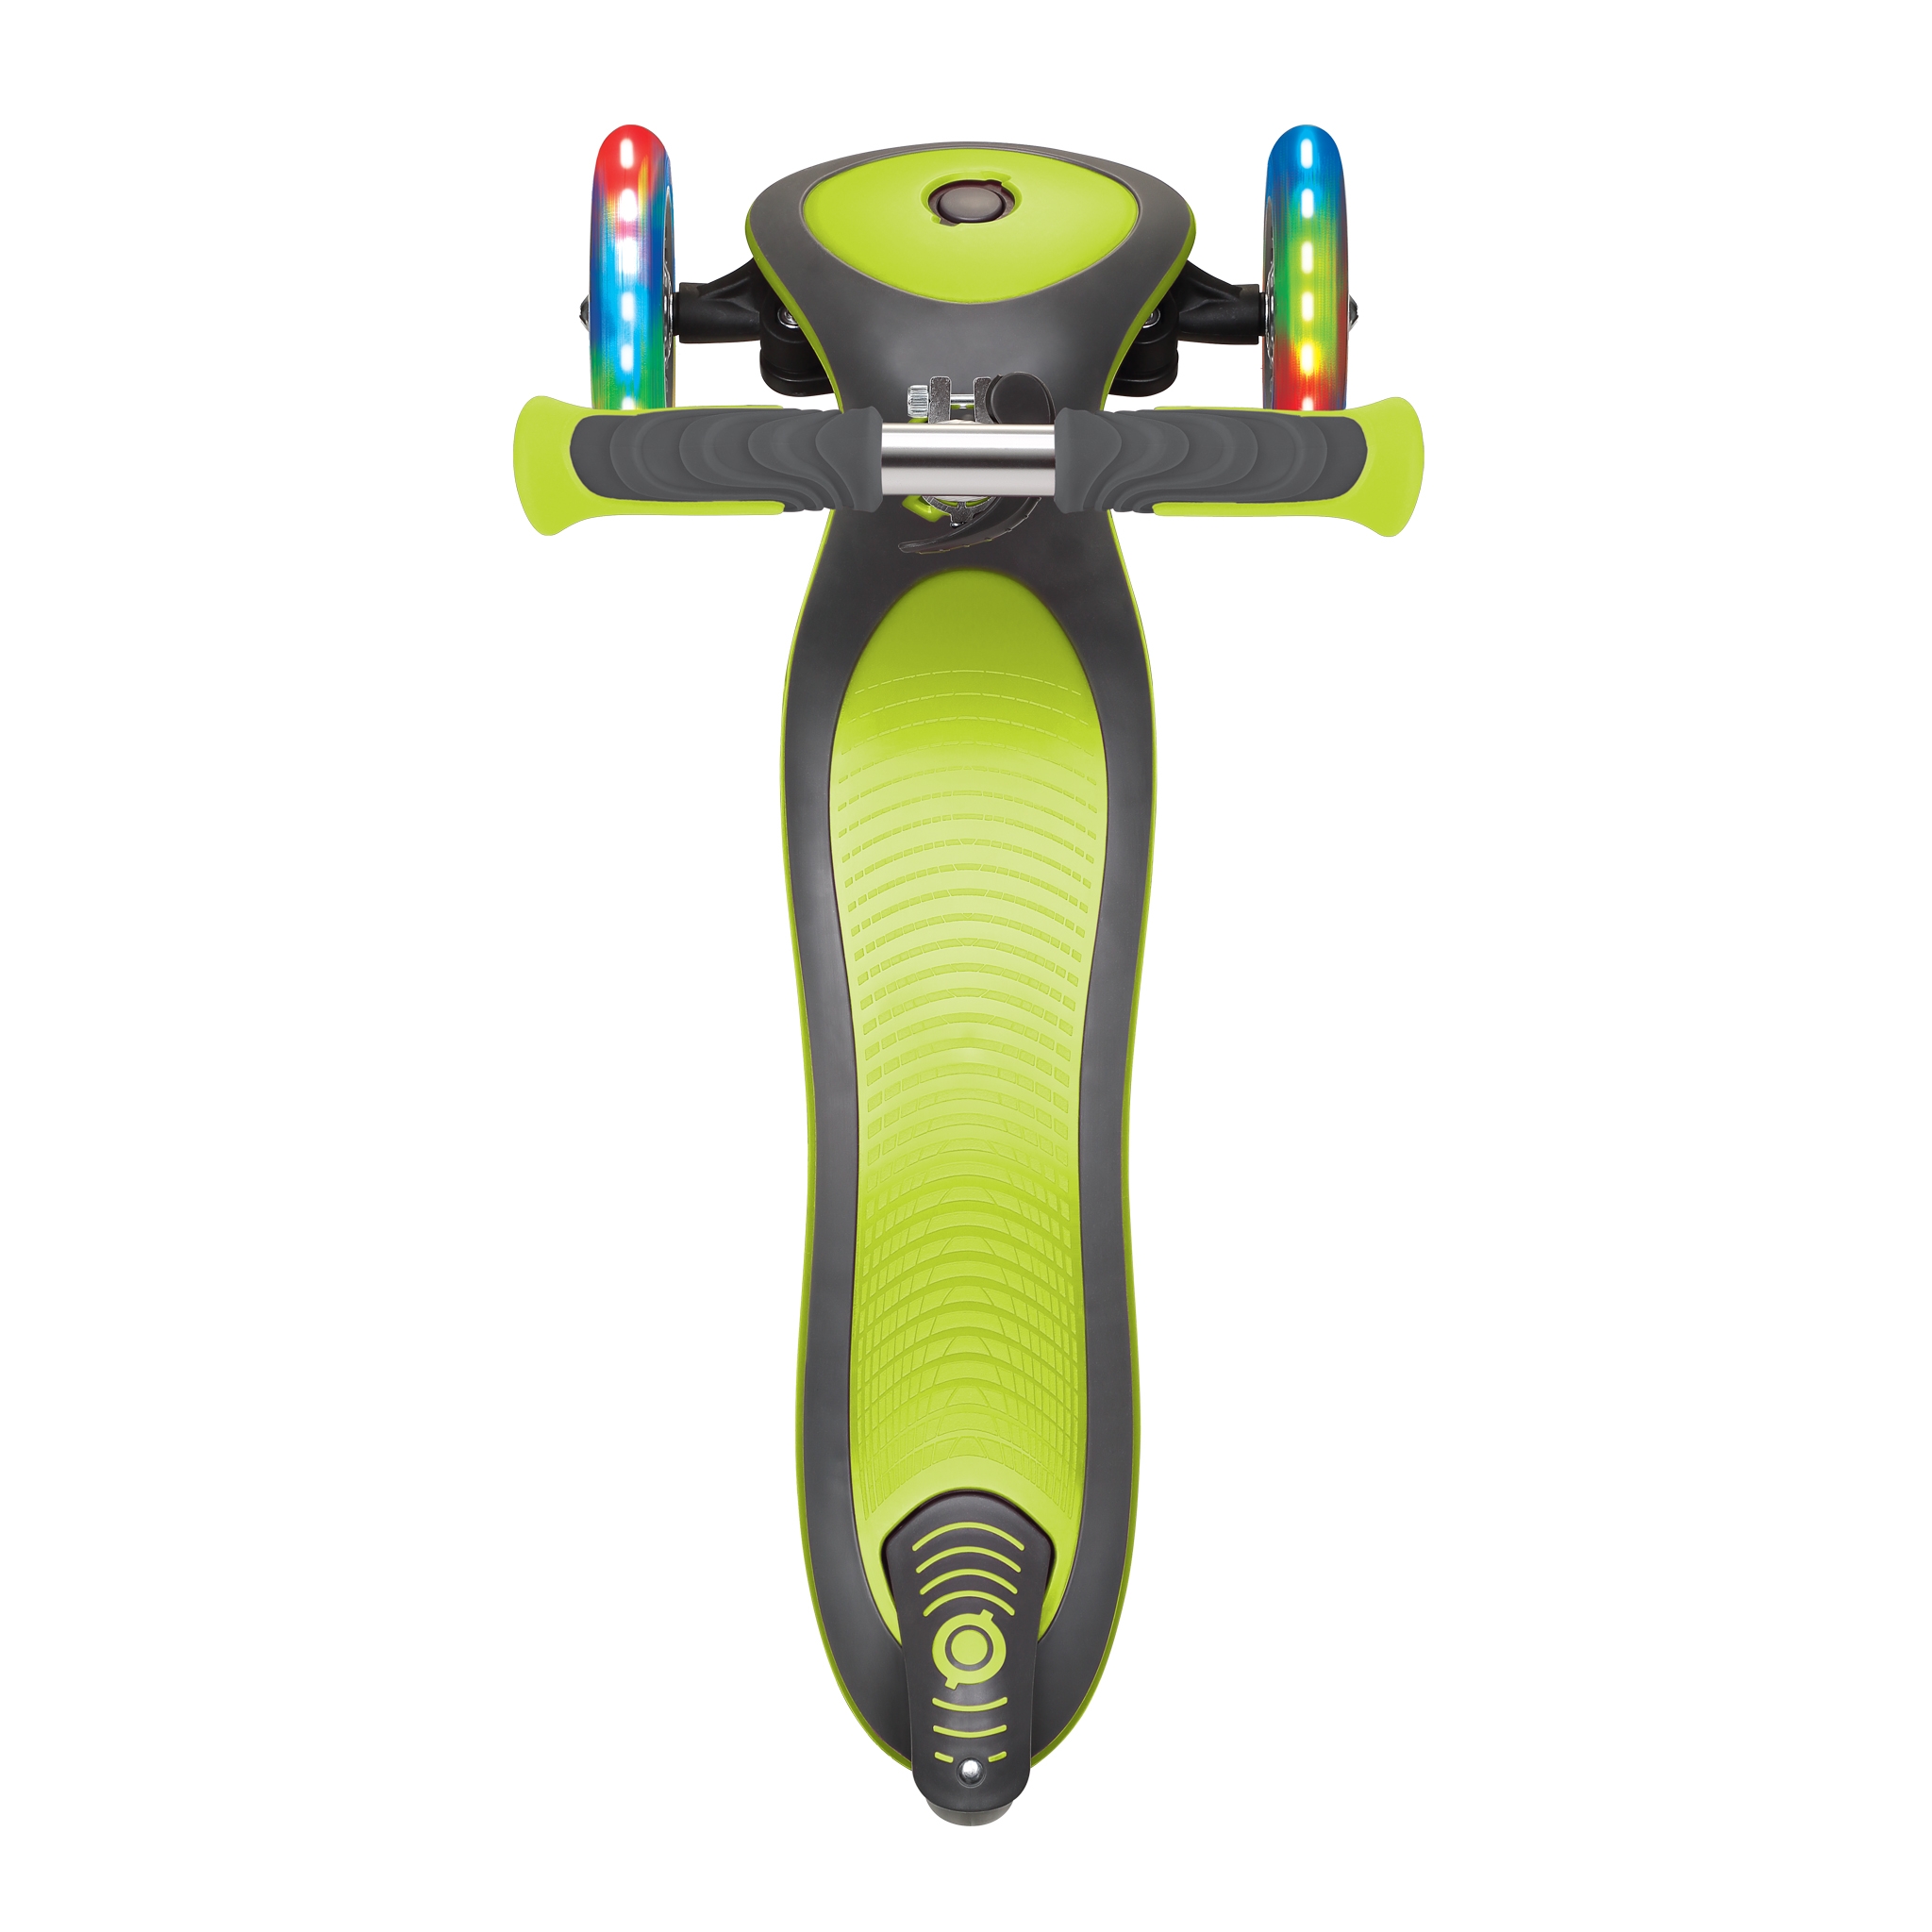 Globber-ELITE-DELUXE-LIGHTS-3-wheel-foldable-scooter-with-extra-wide-scooter-deck-lime-green 4